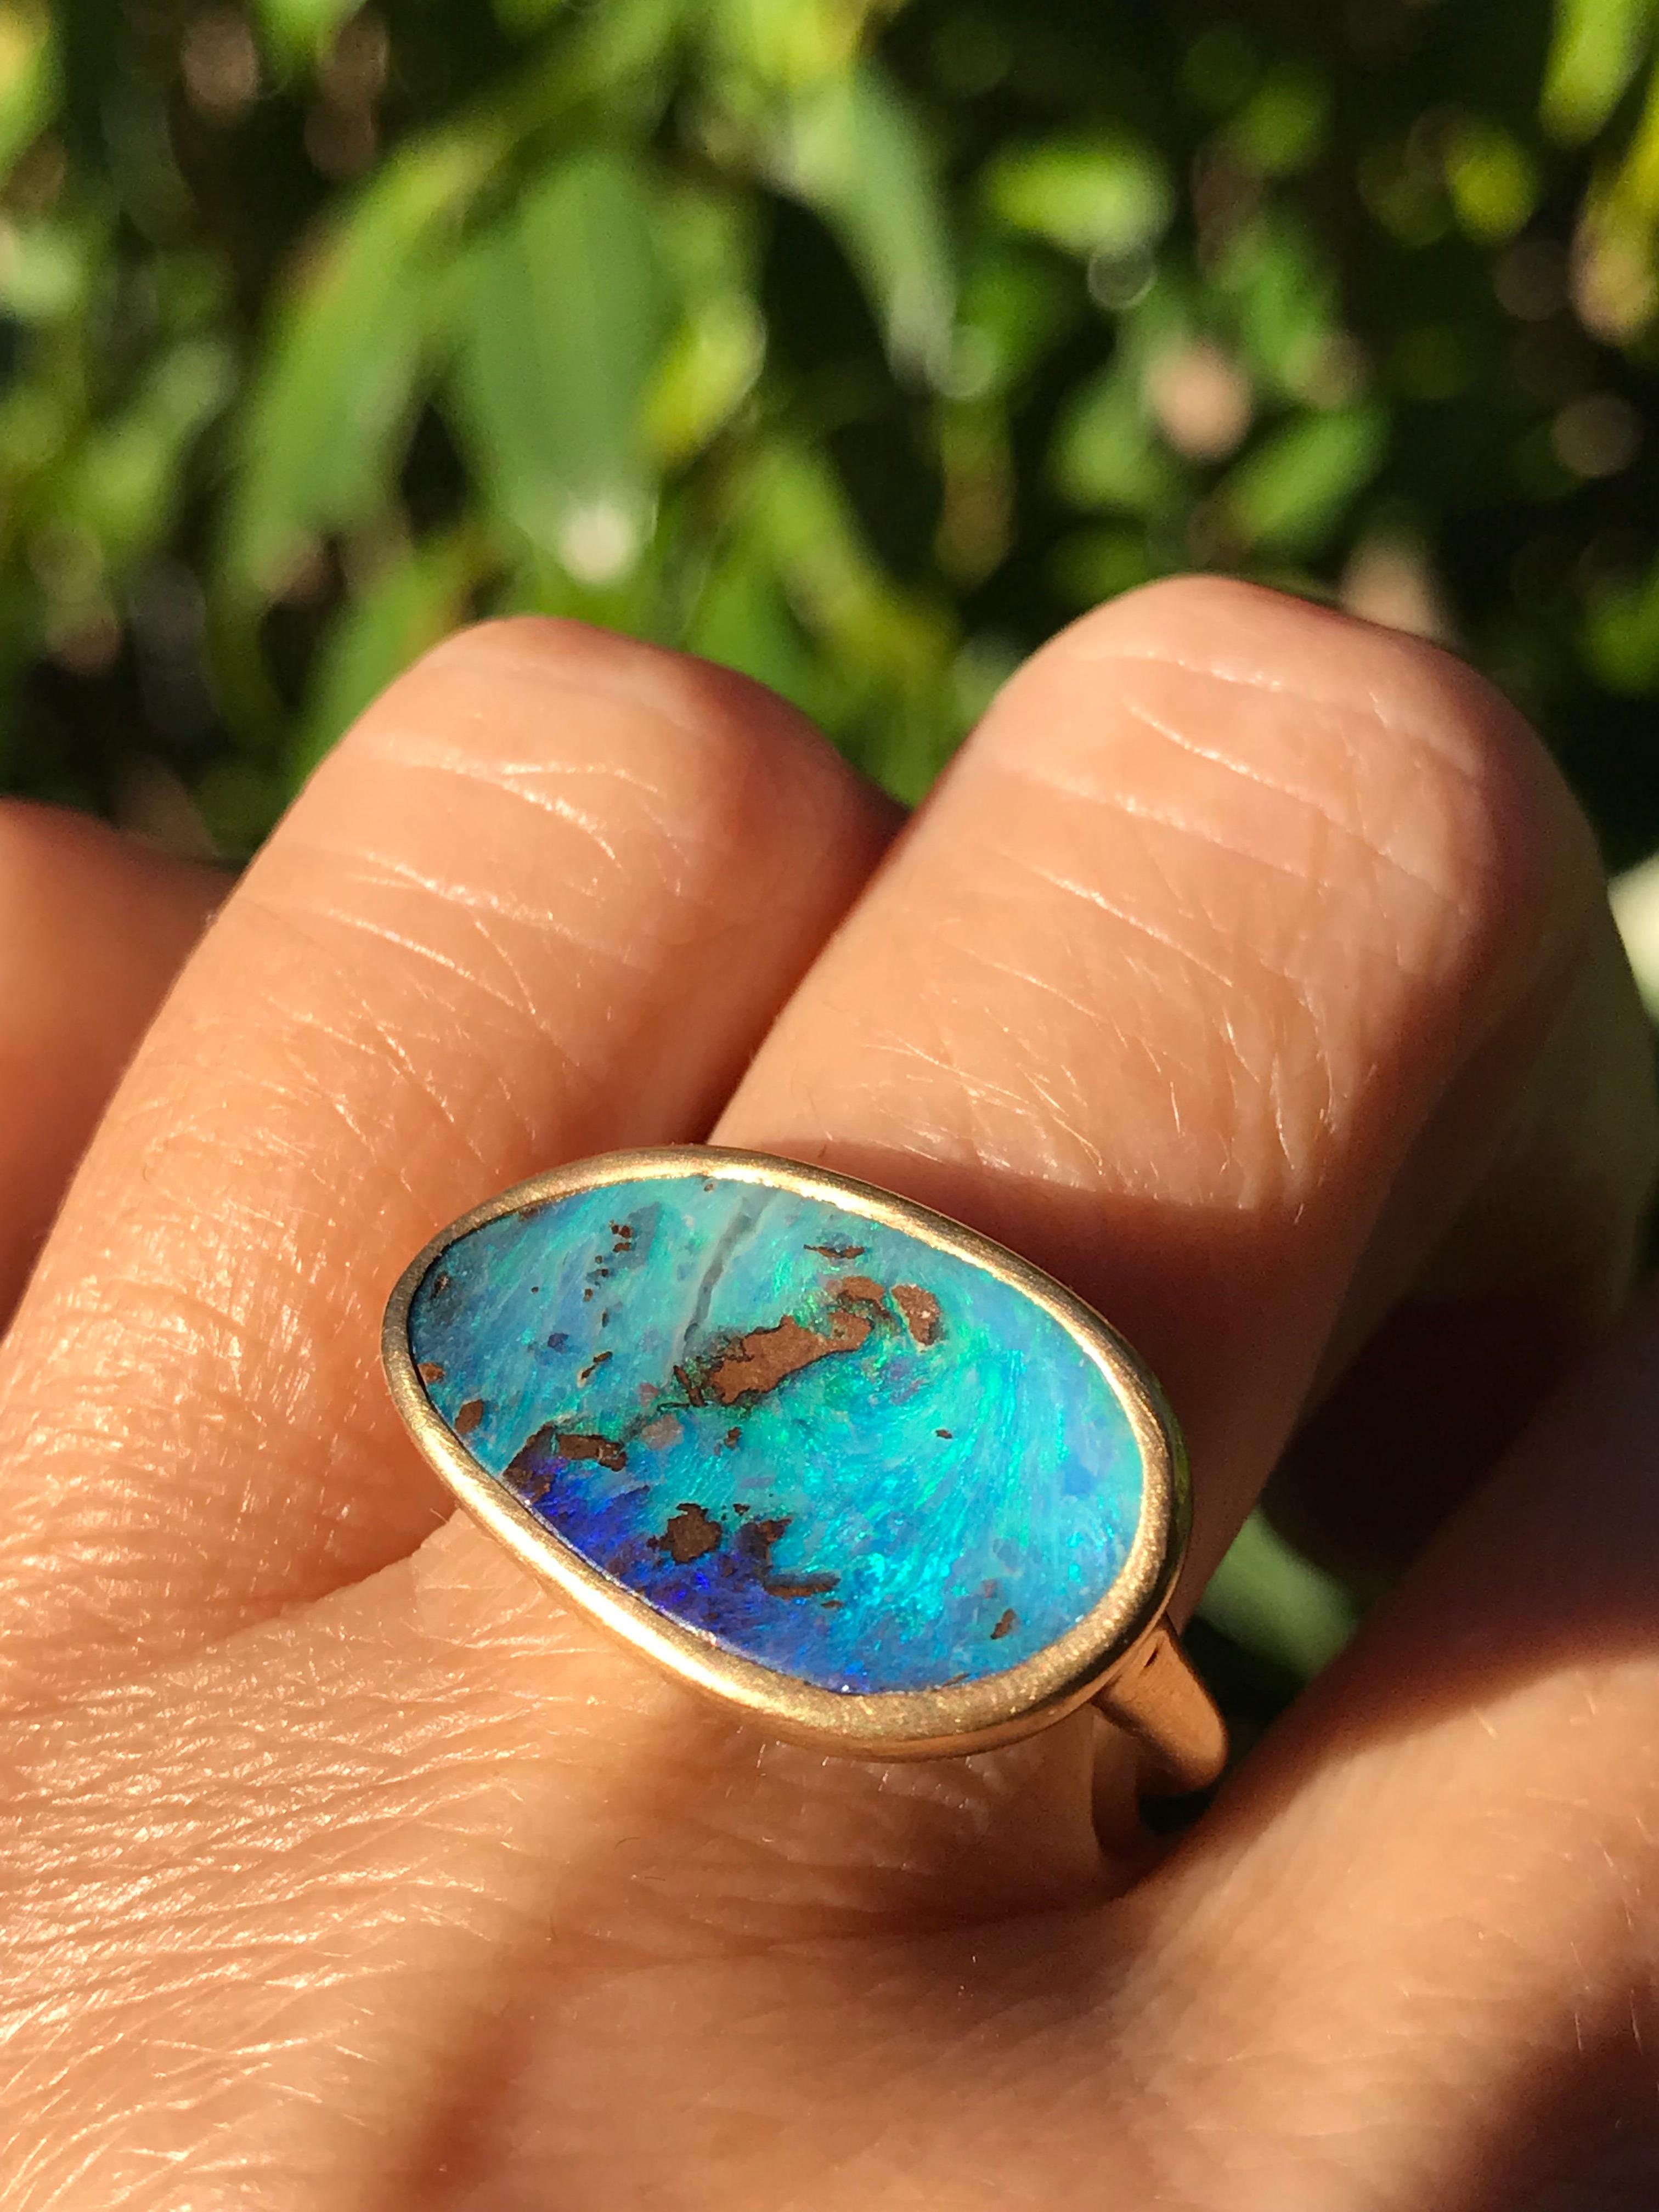 Dalben design One of a kind 18 kt yellow gold matte finishing ring with a 6,5 carat bezel-set azure Australian Boulder Opal .  
The stone sea bed color is azure and blue with some part of brown matrix.
Ring size 7 - EU 55 re-sizable to most finger